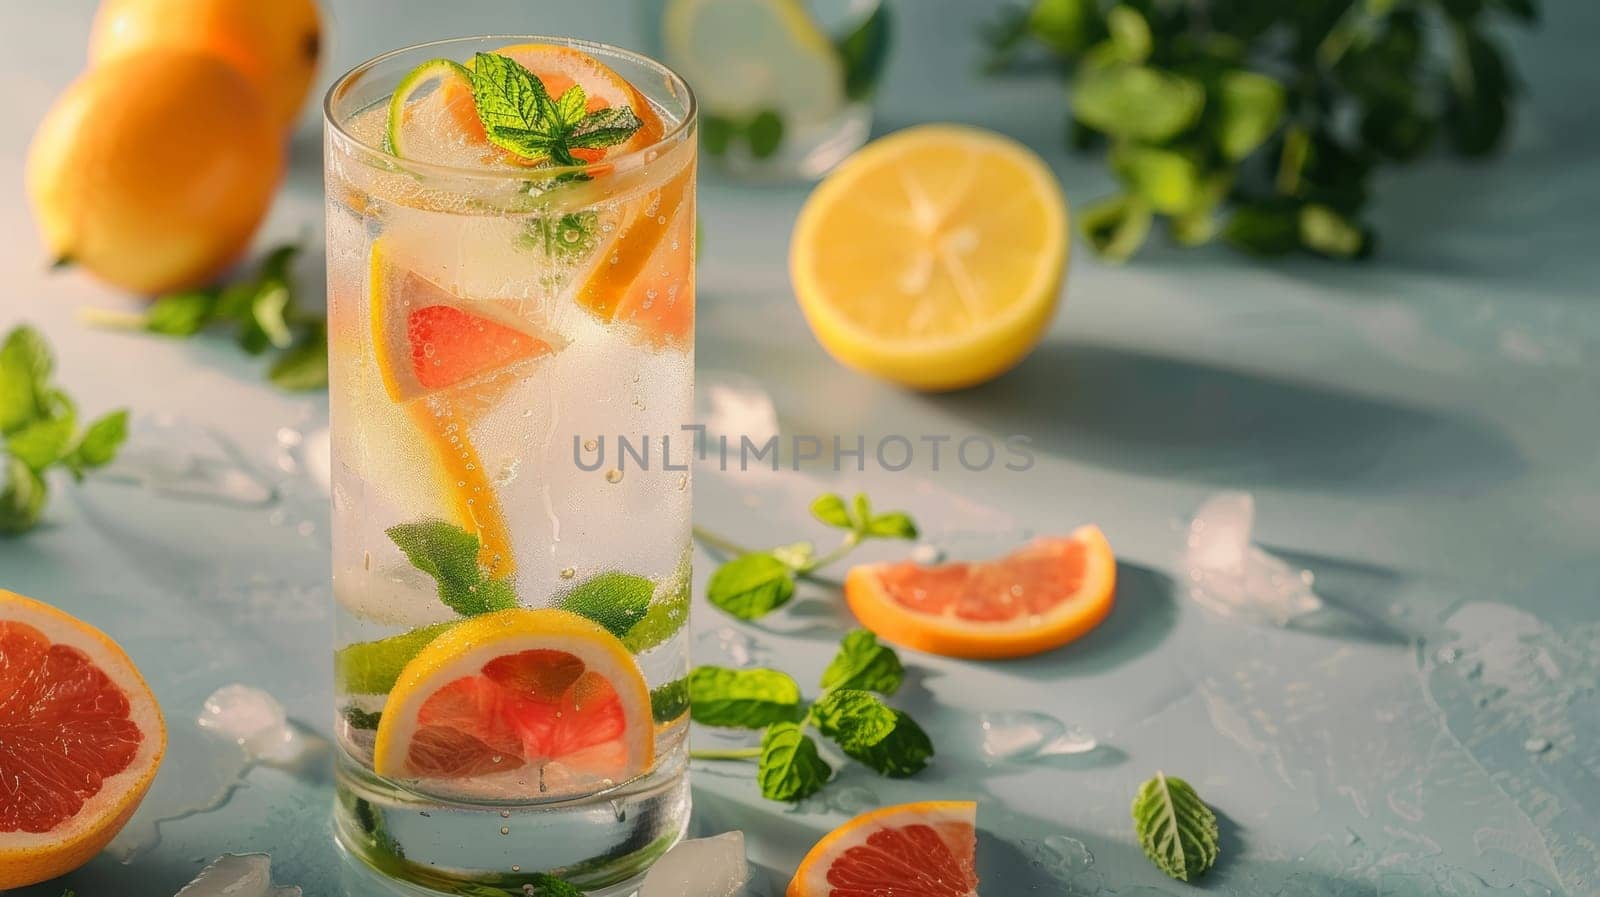 A glass of fruit-infused sparkling water with ice, showcasing slices of lemon and blood orange, accompanied by fresh mint